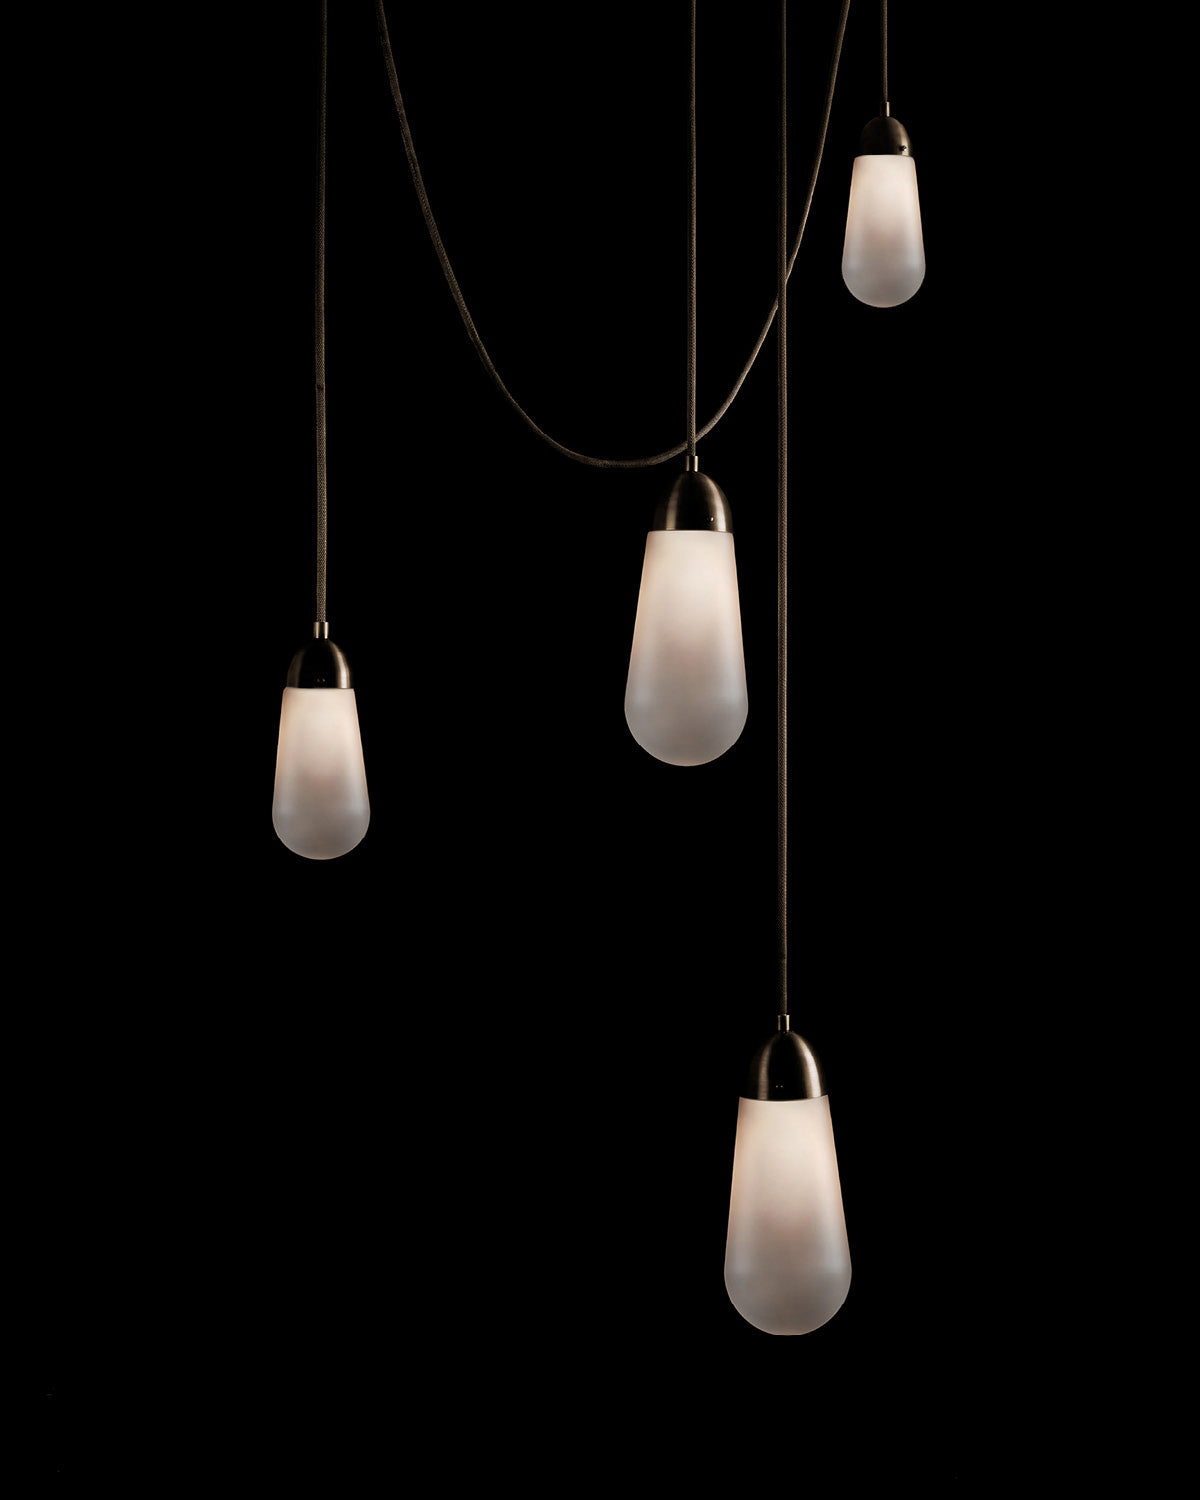 A LARIAT installation, comprised of four ceiling pendants in an assortment of sizes and heights, in Oil-Rubbed Bronze finish. 